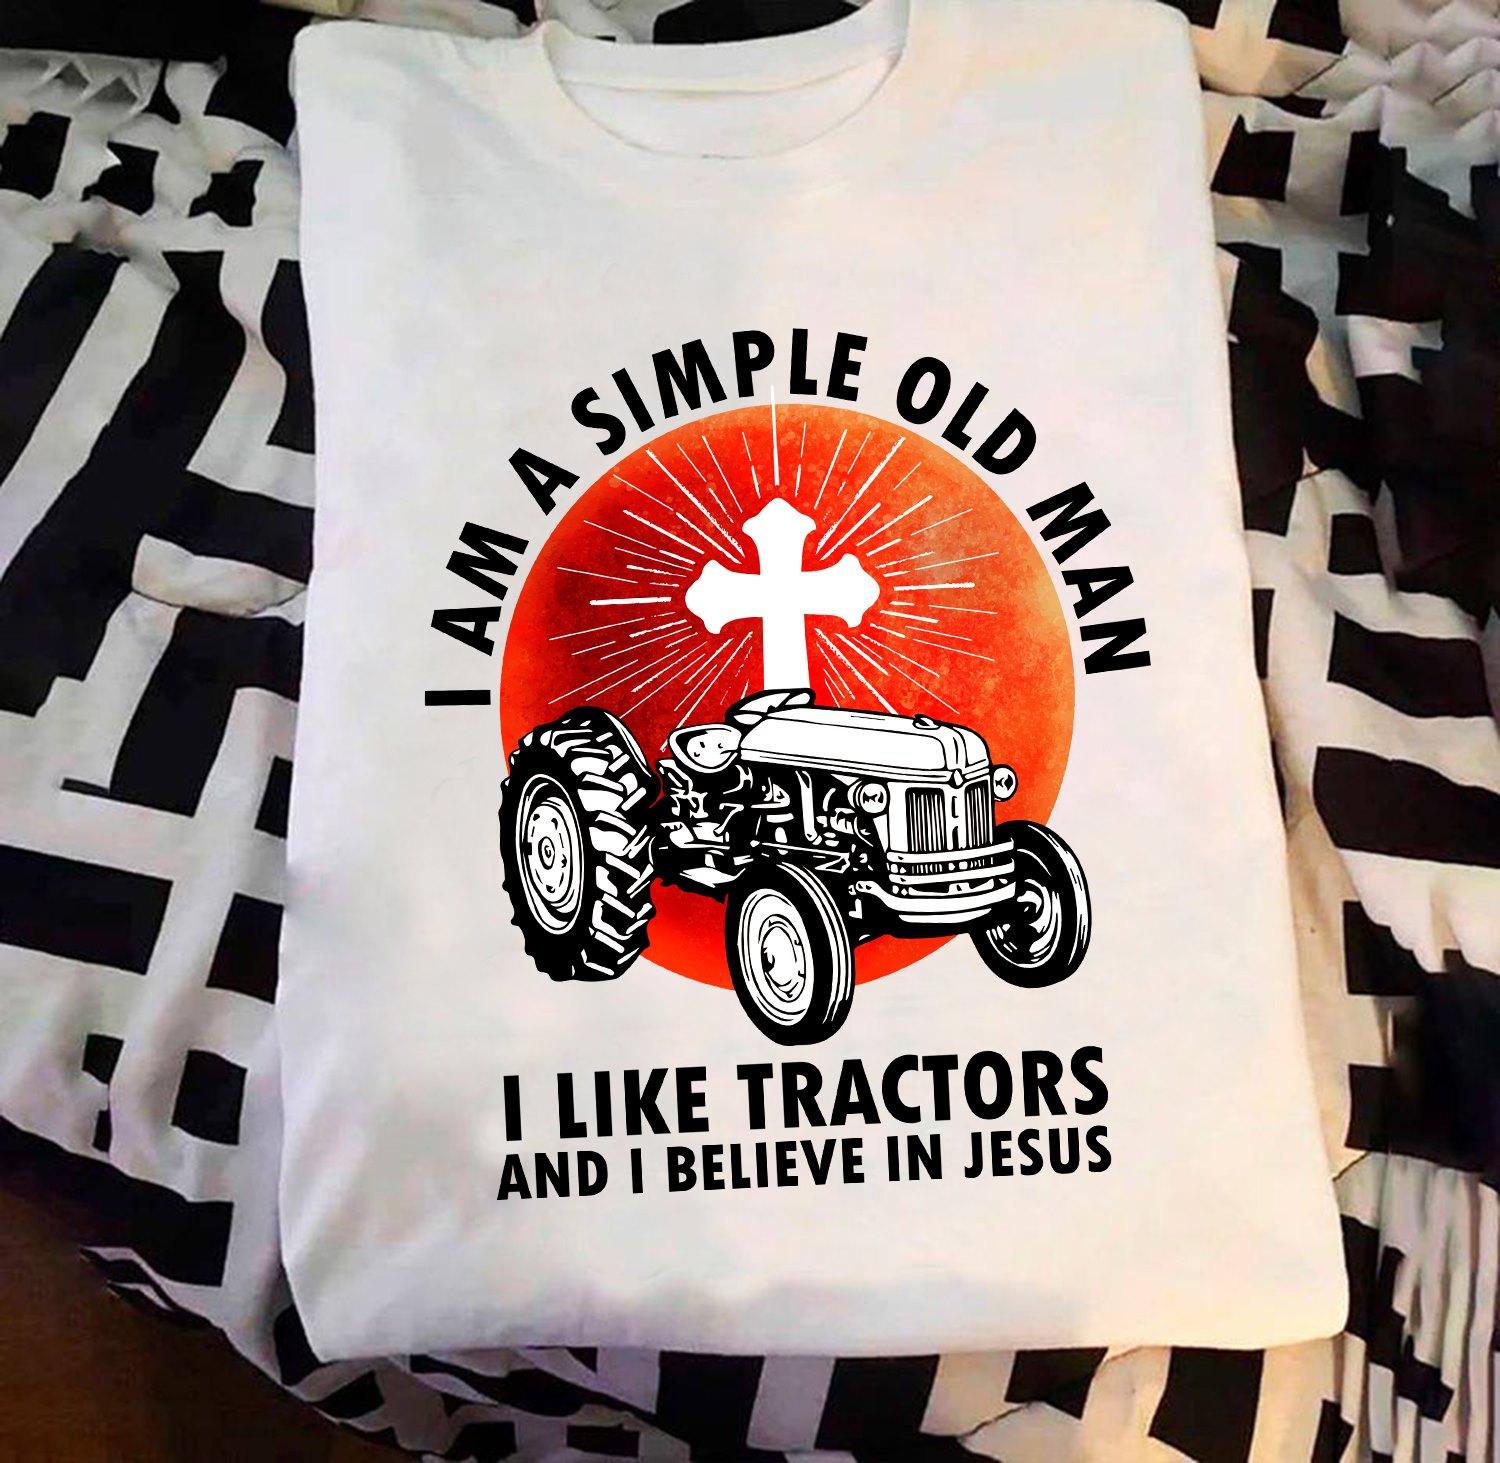 Man Love Tractor, God's Cross - I am a simple old man i like tractors and i believe in Jesus